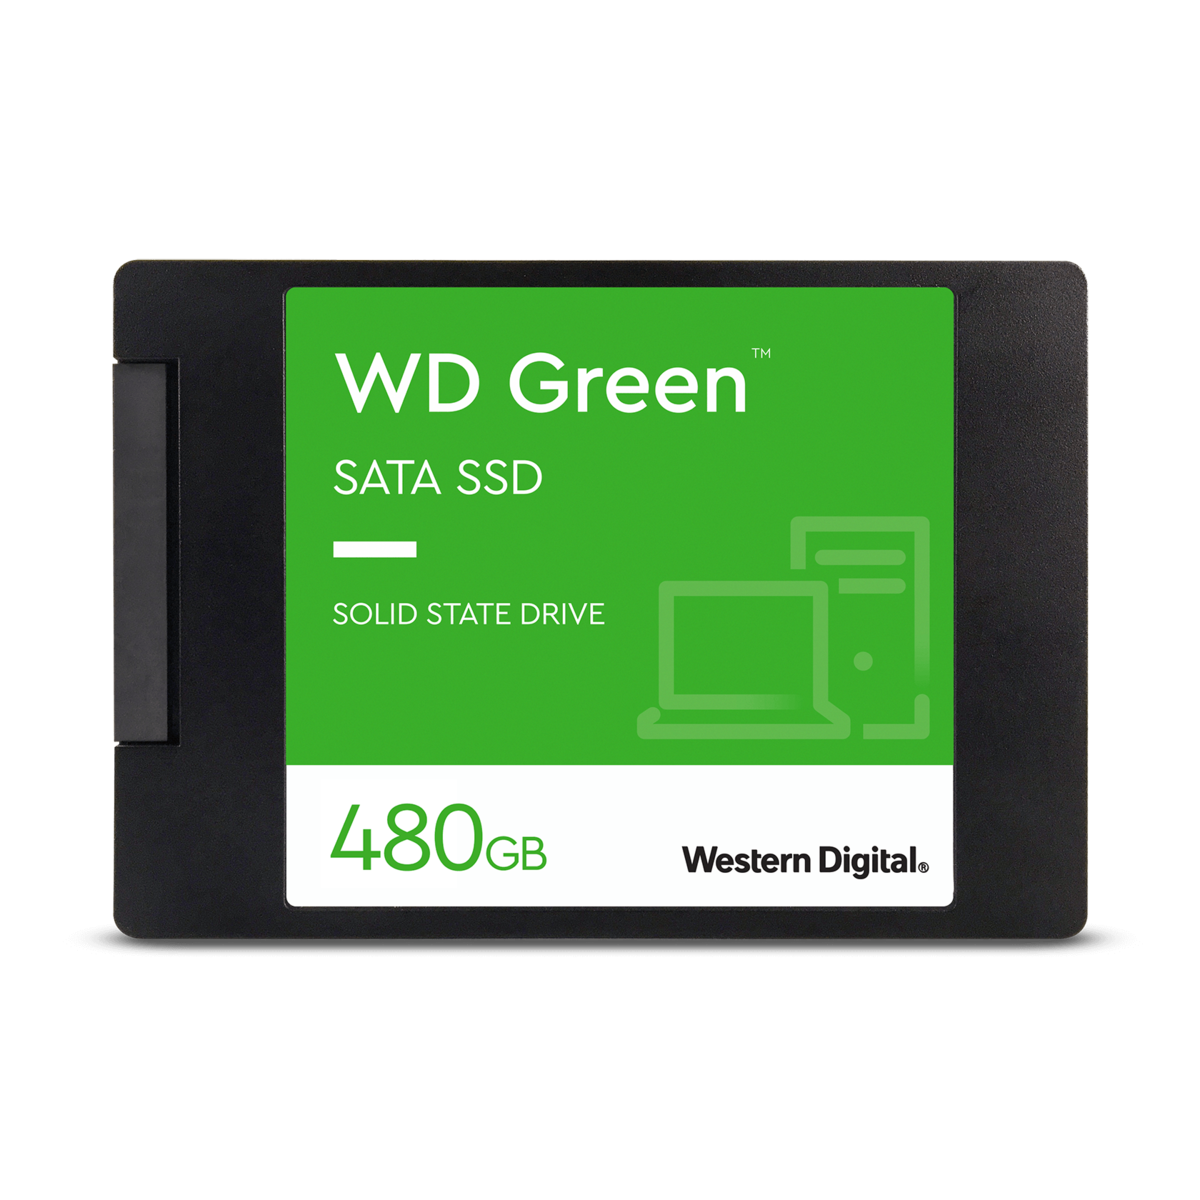 slide 1 of 3, show larger image, wd green ssd 2.5